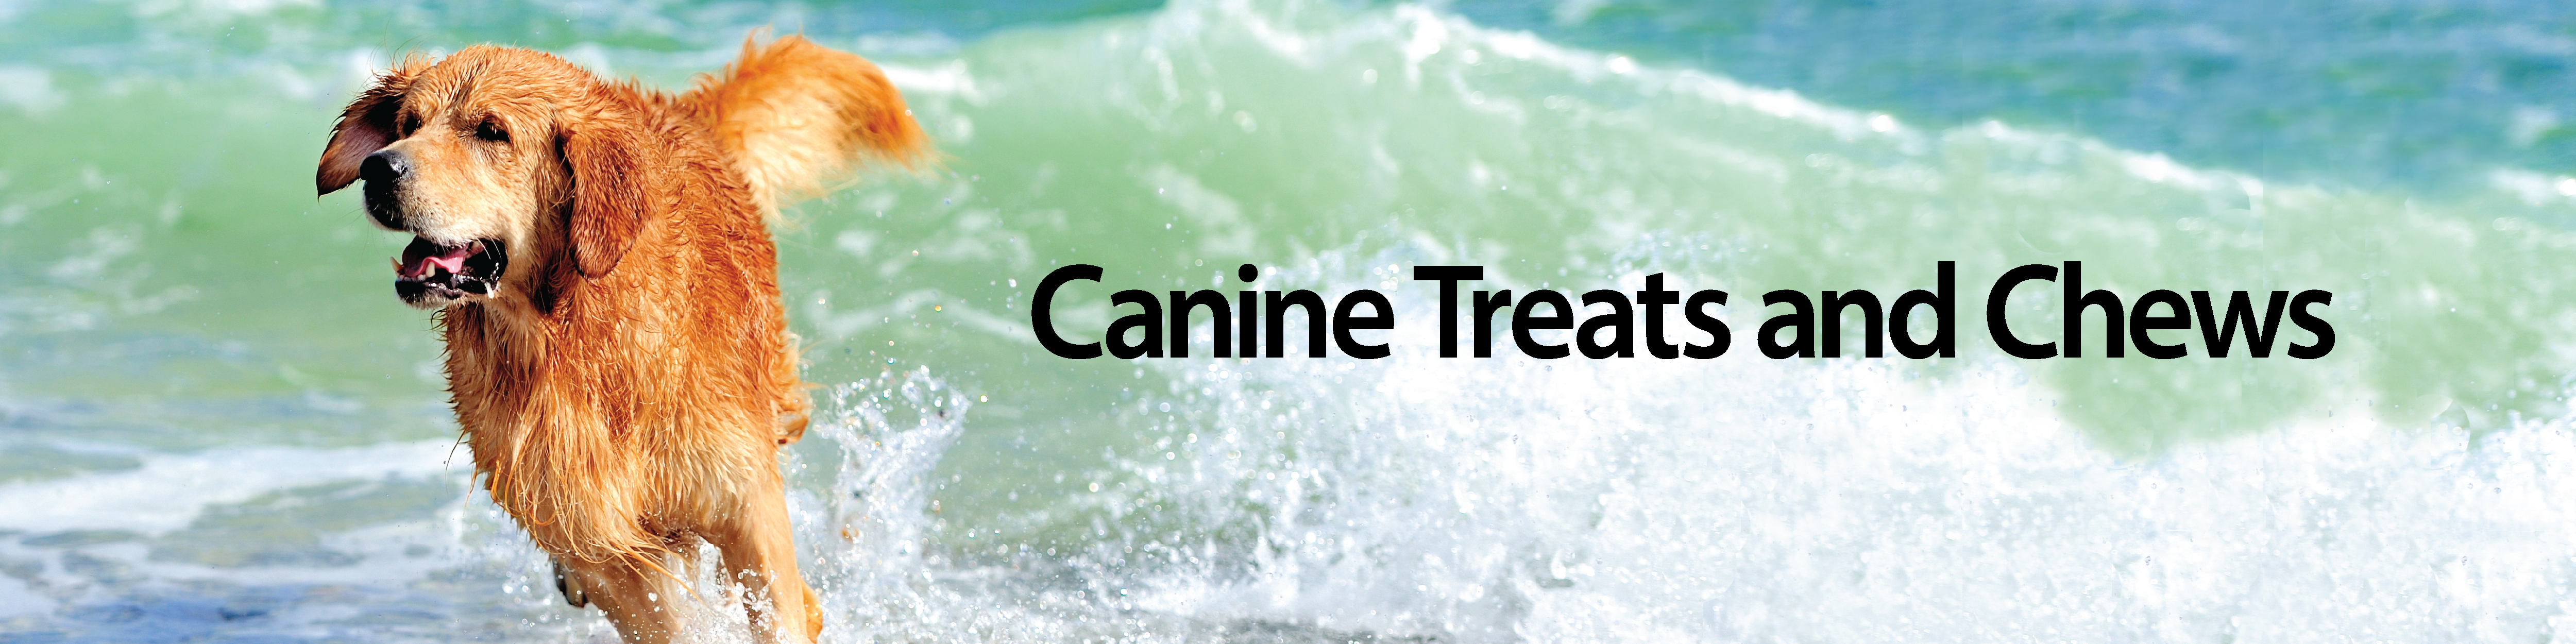 Canine Treats and Chews title with a golden retriever playing in the surf.